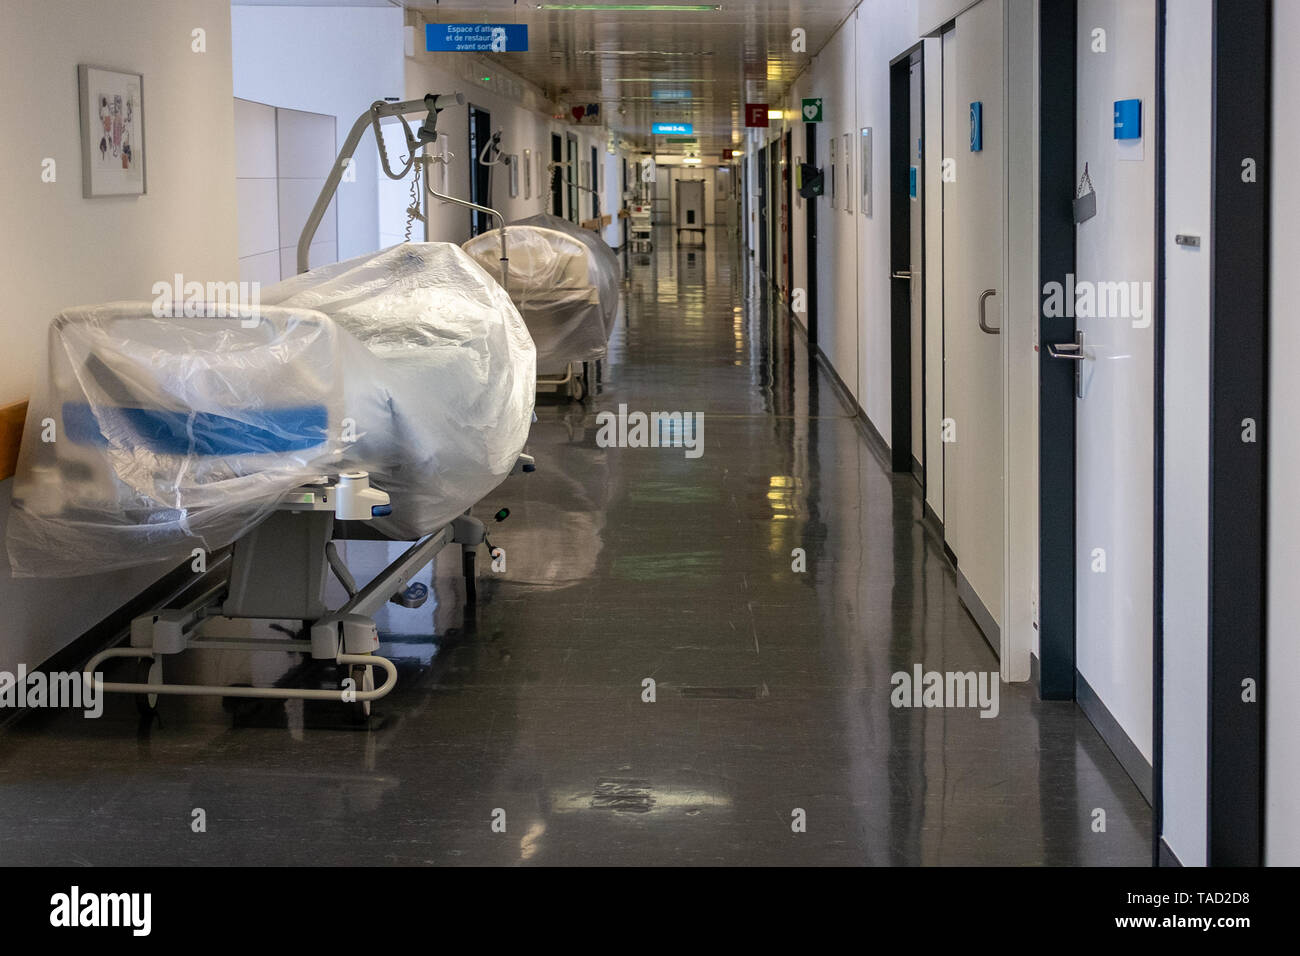 Hopital High Resolution Stock Photography and Images - Alamy